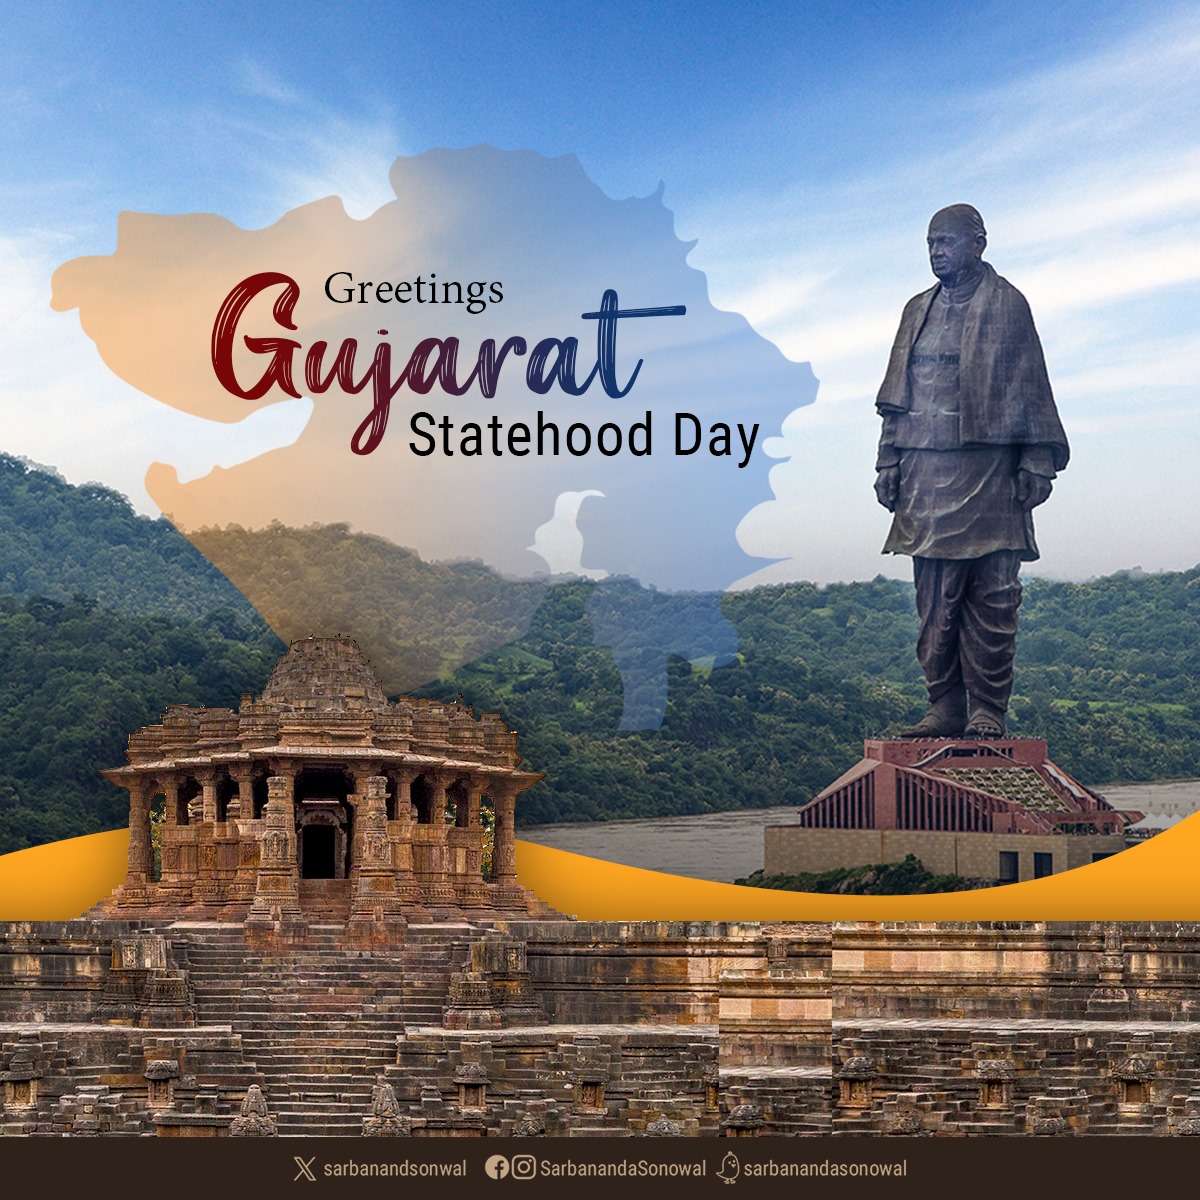 Greetings to my brothers & sisters of Gujarat on the occasion of Gujarat Statehood Day. My best wishes for further growth of this sacred land, that has pioneered the spirit of entrepreneurship and business across the world. 

#GujaratDay